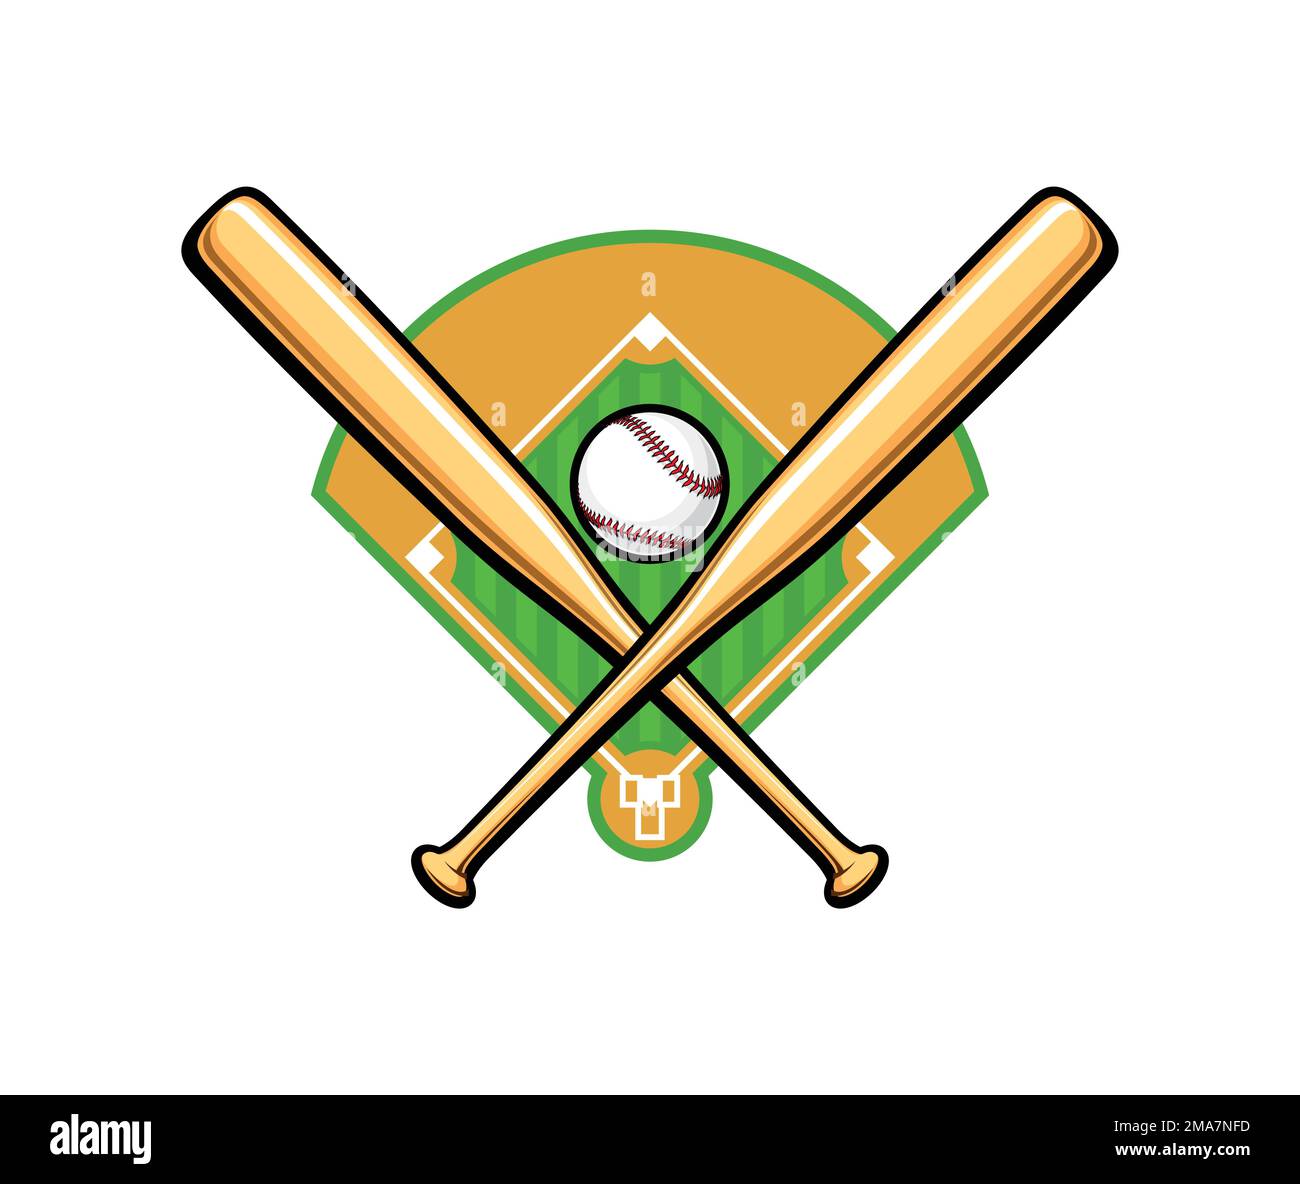 simple classic wooden baseball bat ball and diamond field logo vector illustration isolated on white background Stock Vector